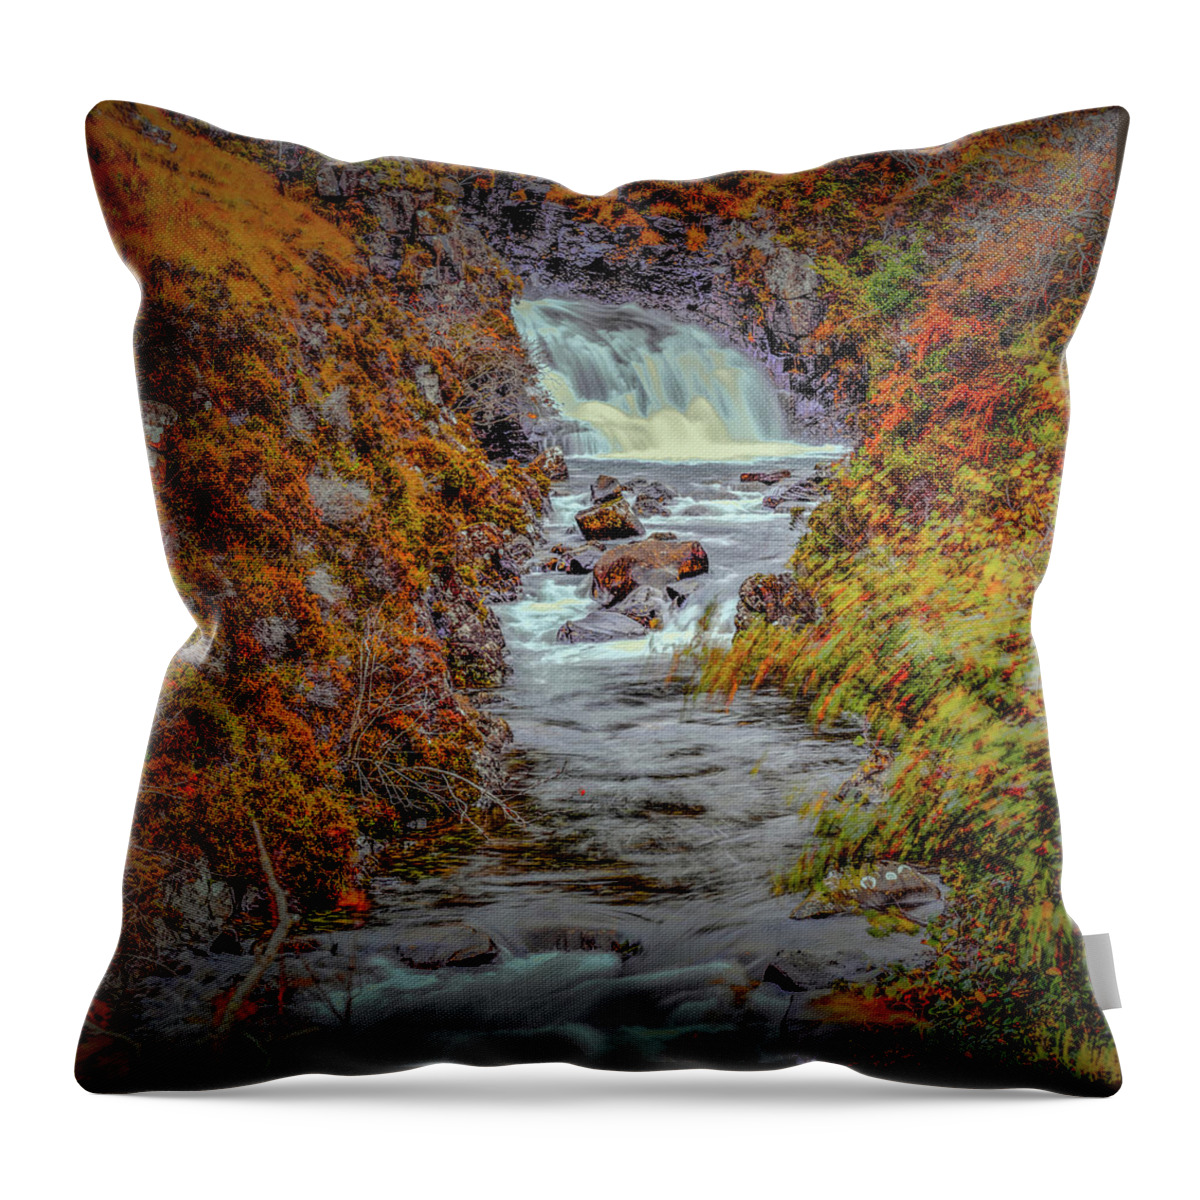 Waterfall Throw Pillow featuring the photograph Waterfall #g8 by Leif Sohlman